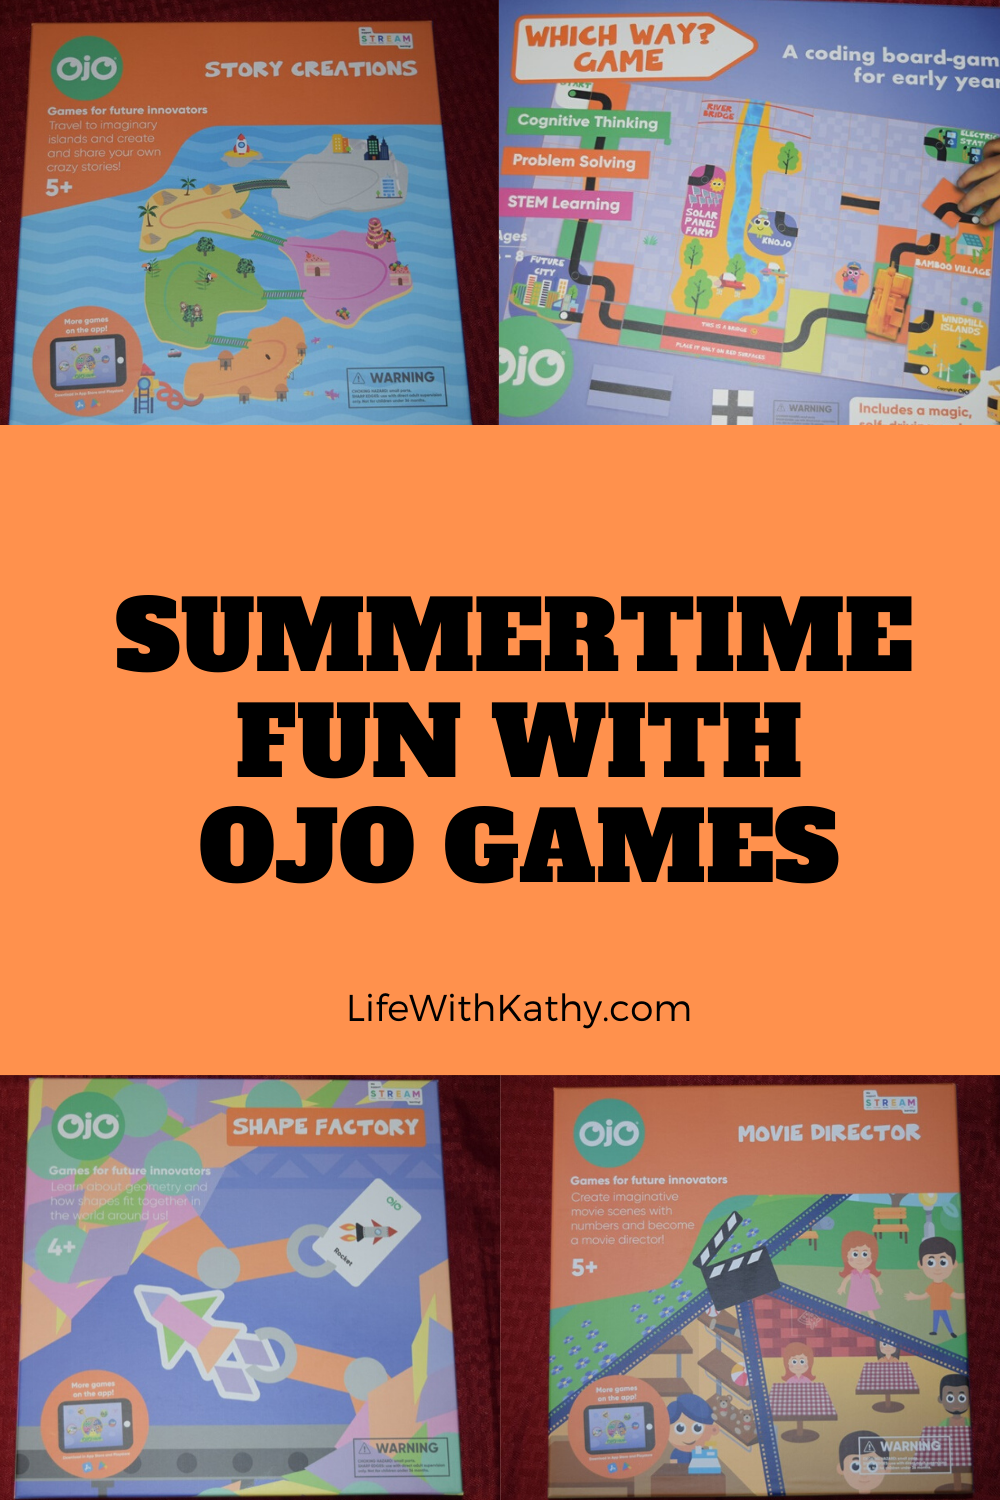 Age 5 Years and up a Math Board Game for Kids Kids Make Movies While Learning Math and Problem Solving. OjO Movie Director . 